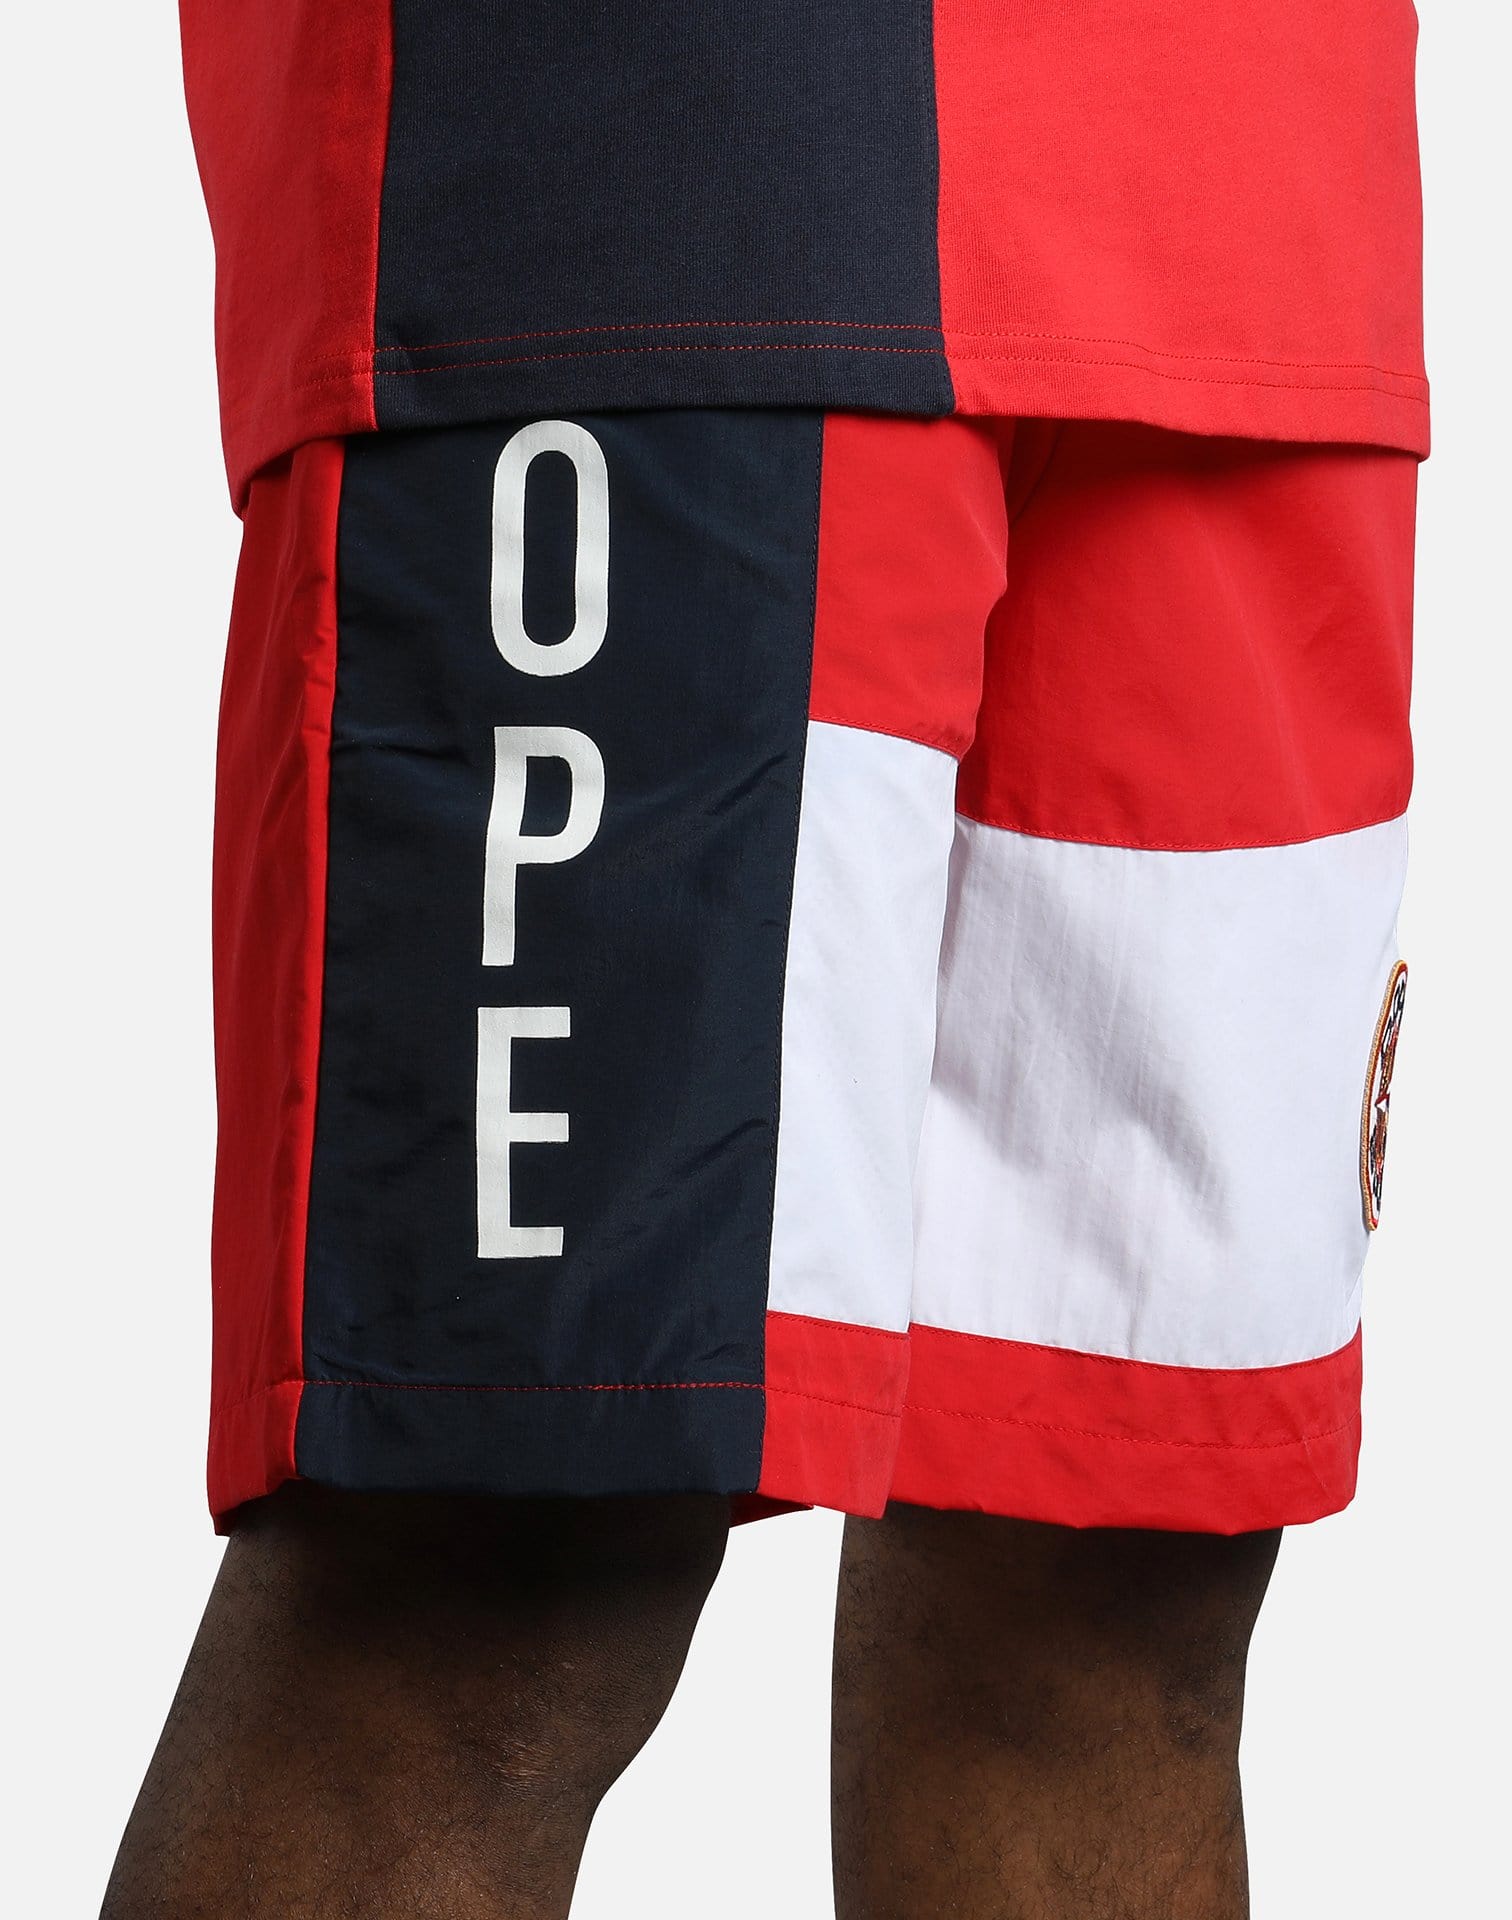 Dope ORION SHORTS